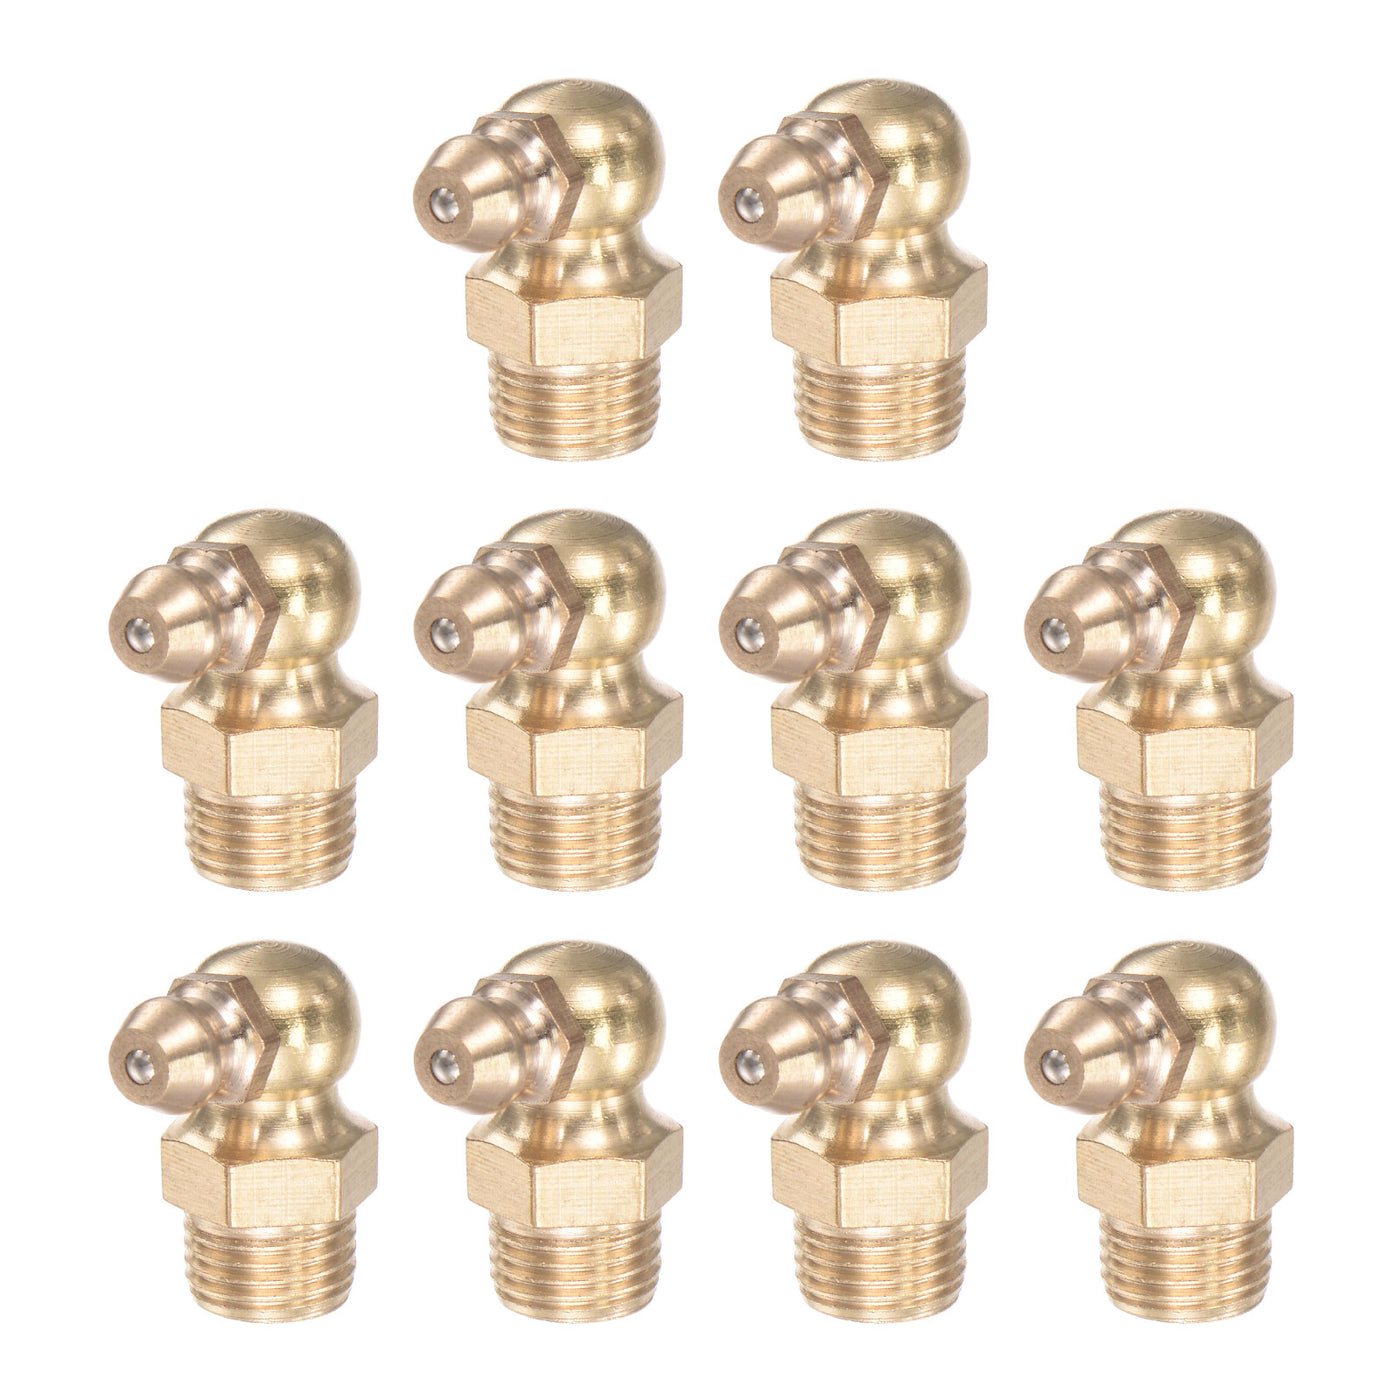 Uxcell Uxcell Brass 90 Degree Hydraulic Grease Fitting M8 x 1mm Thread, 10Pcs